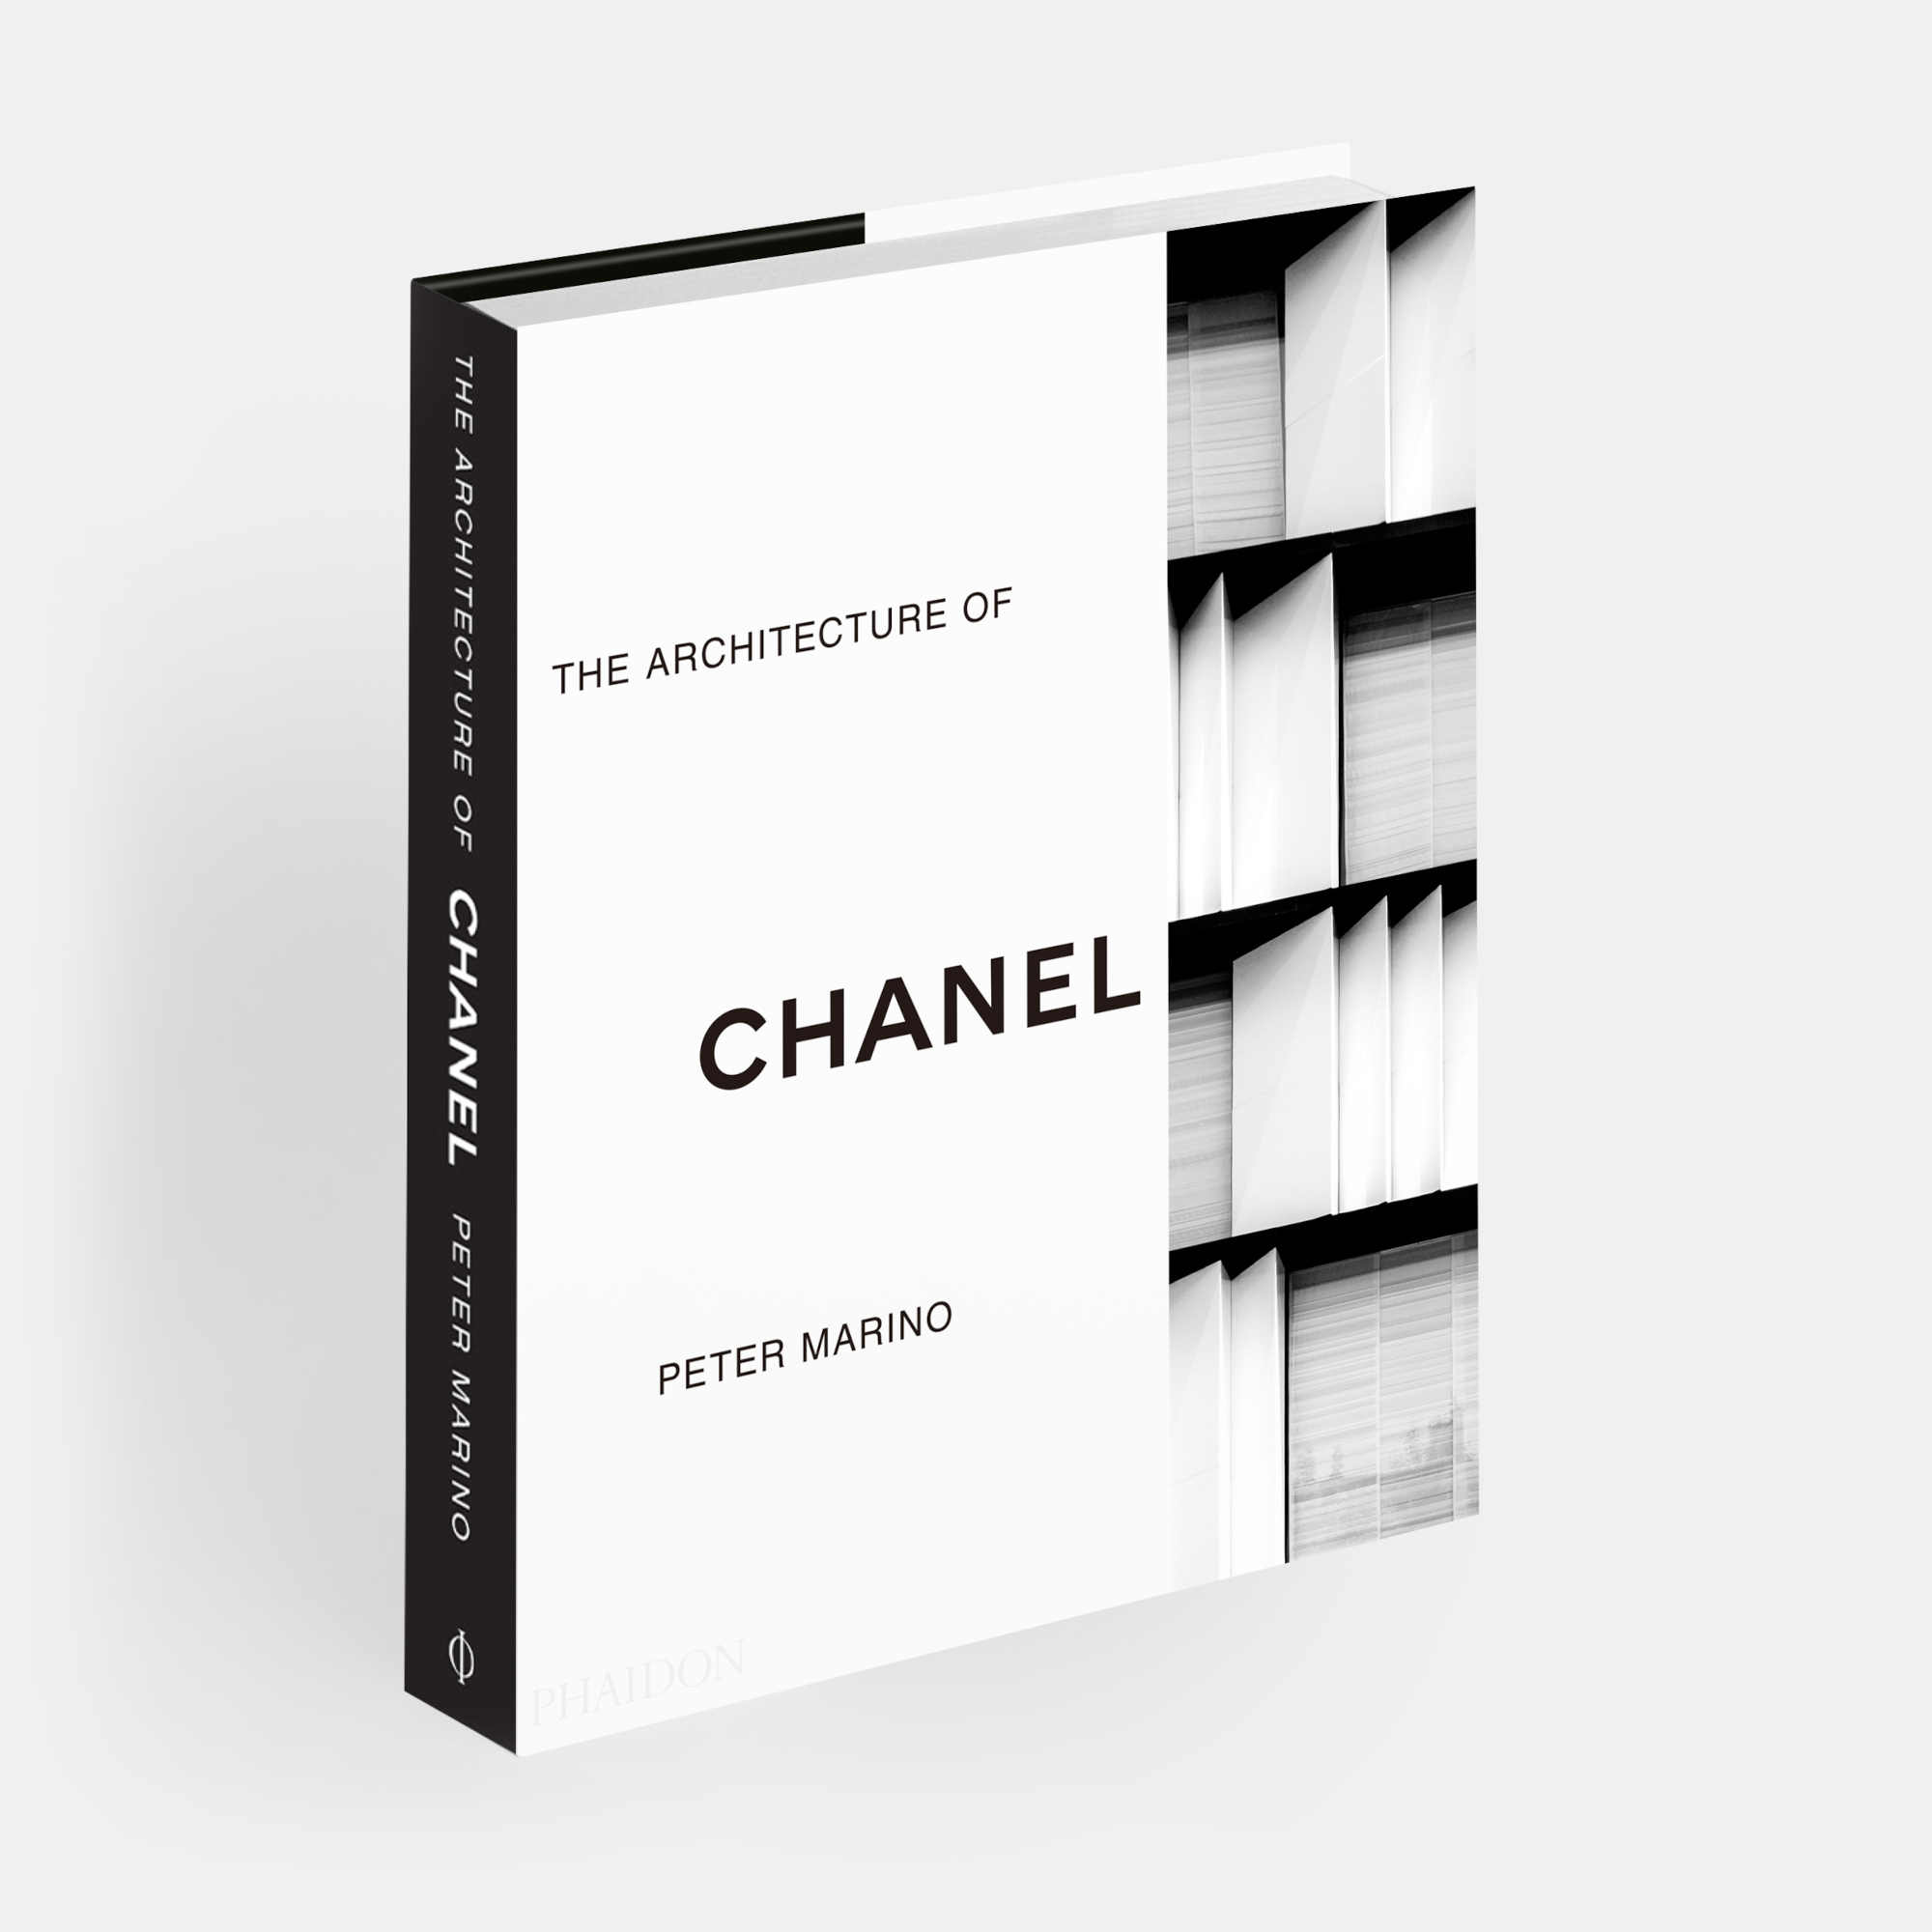 All you need to know about Peter Marino: The Architecture of Chanel